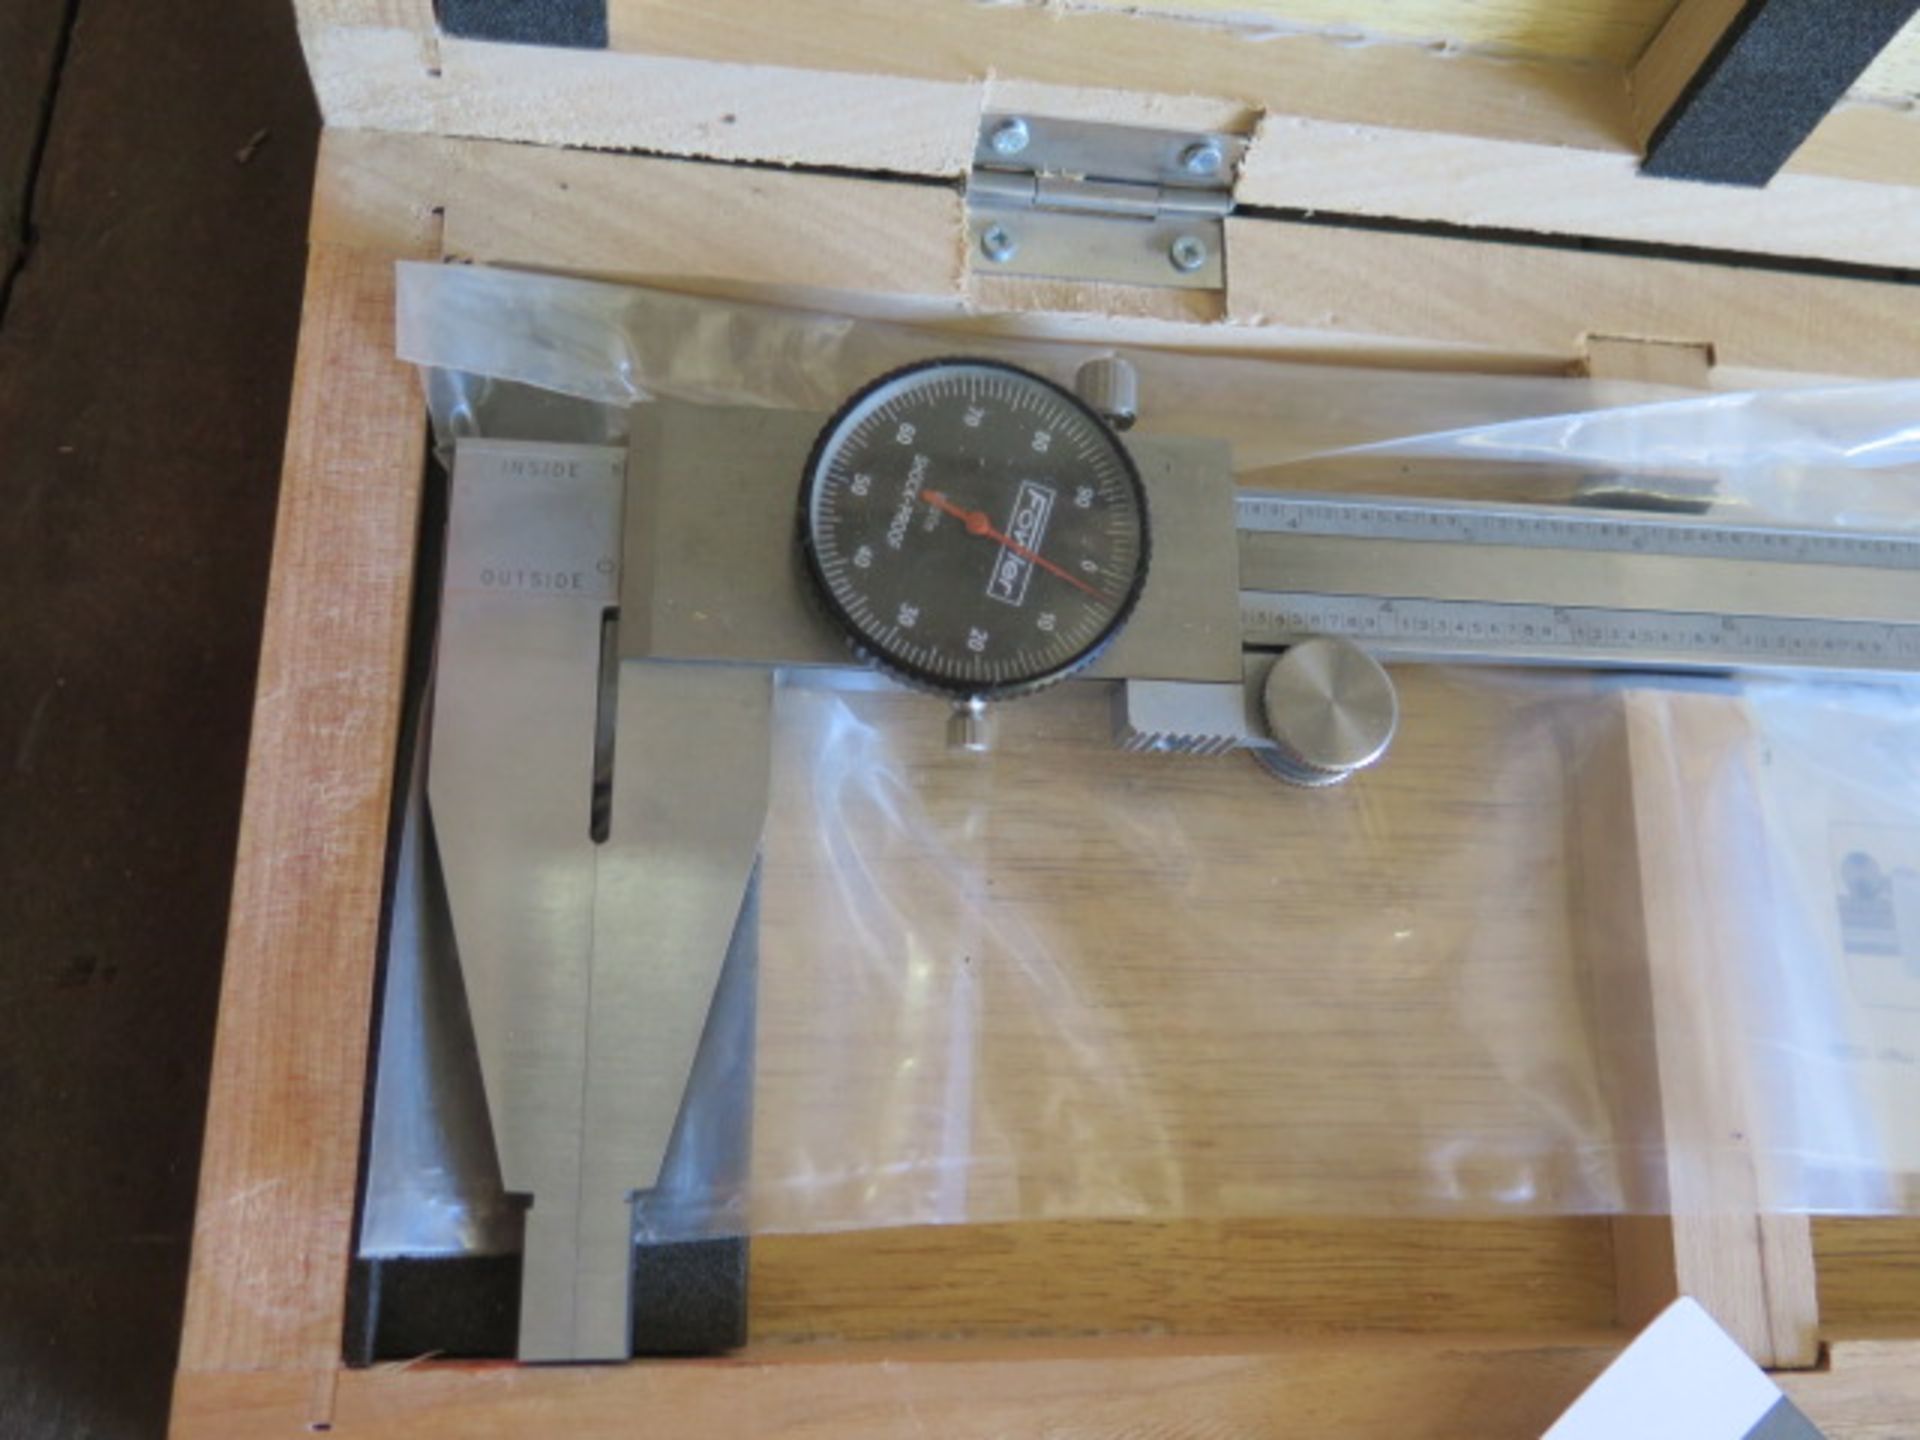 Fowler 24" Dial Caliper (SOLD AS-IS - NO WARRANTY) - Image 3 of 3